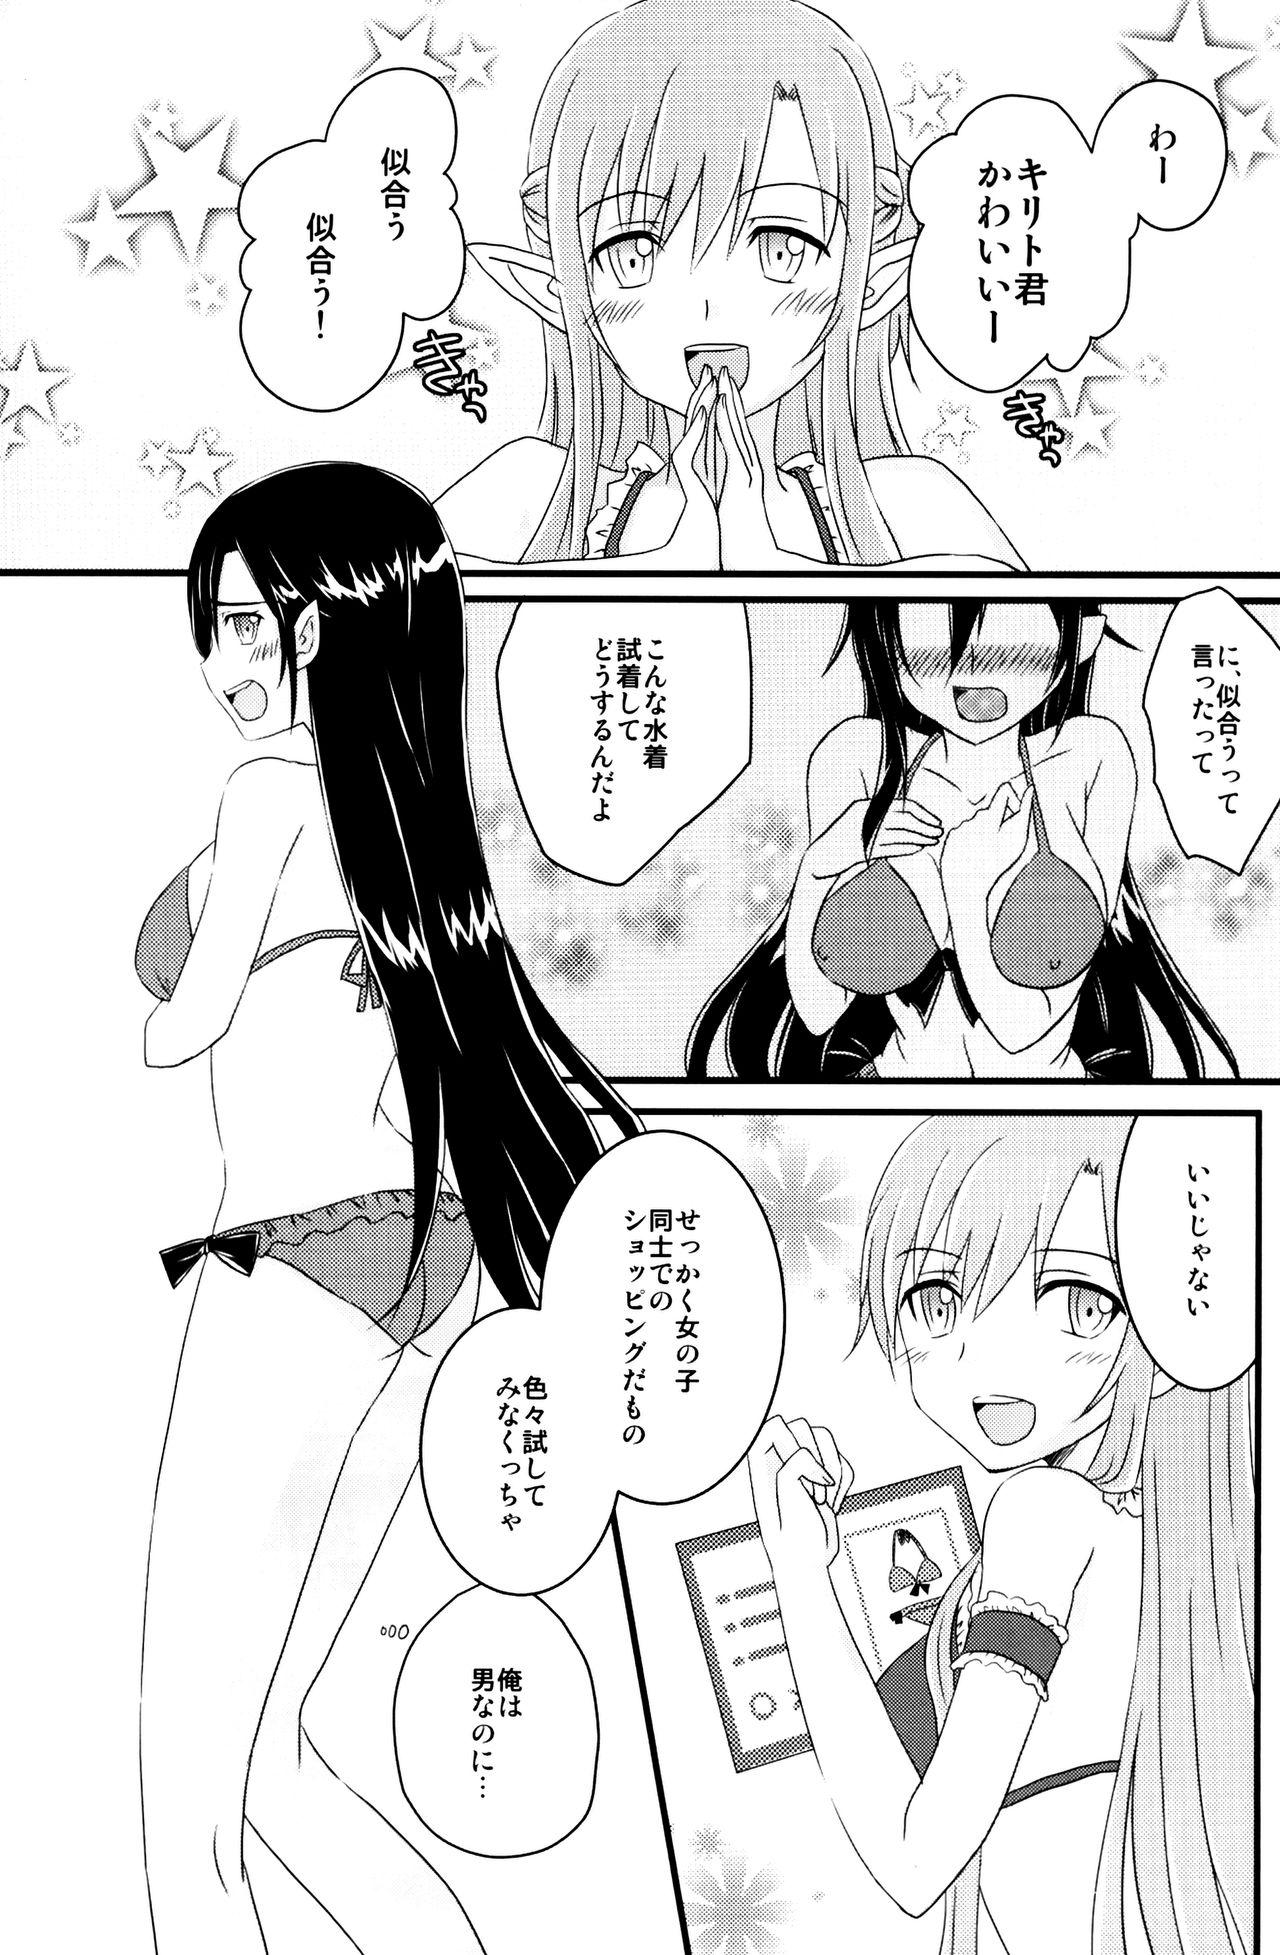 With Kiriko-chan to Asobou! 3 - Sword art online Ano - Page 2